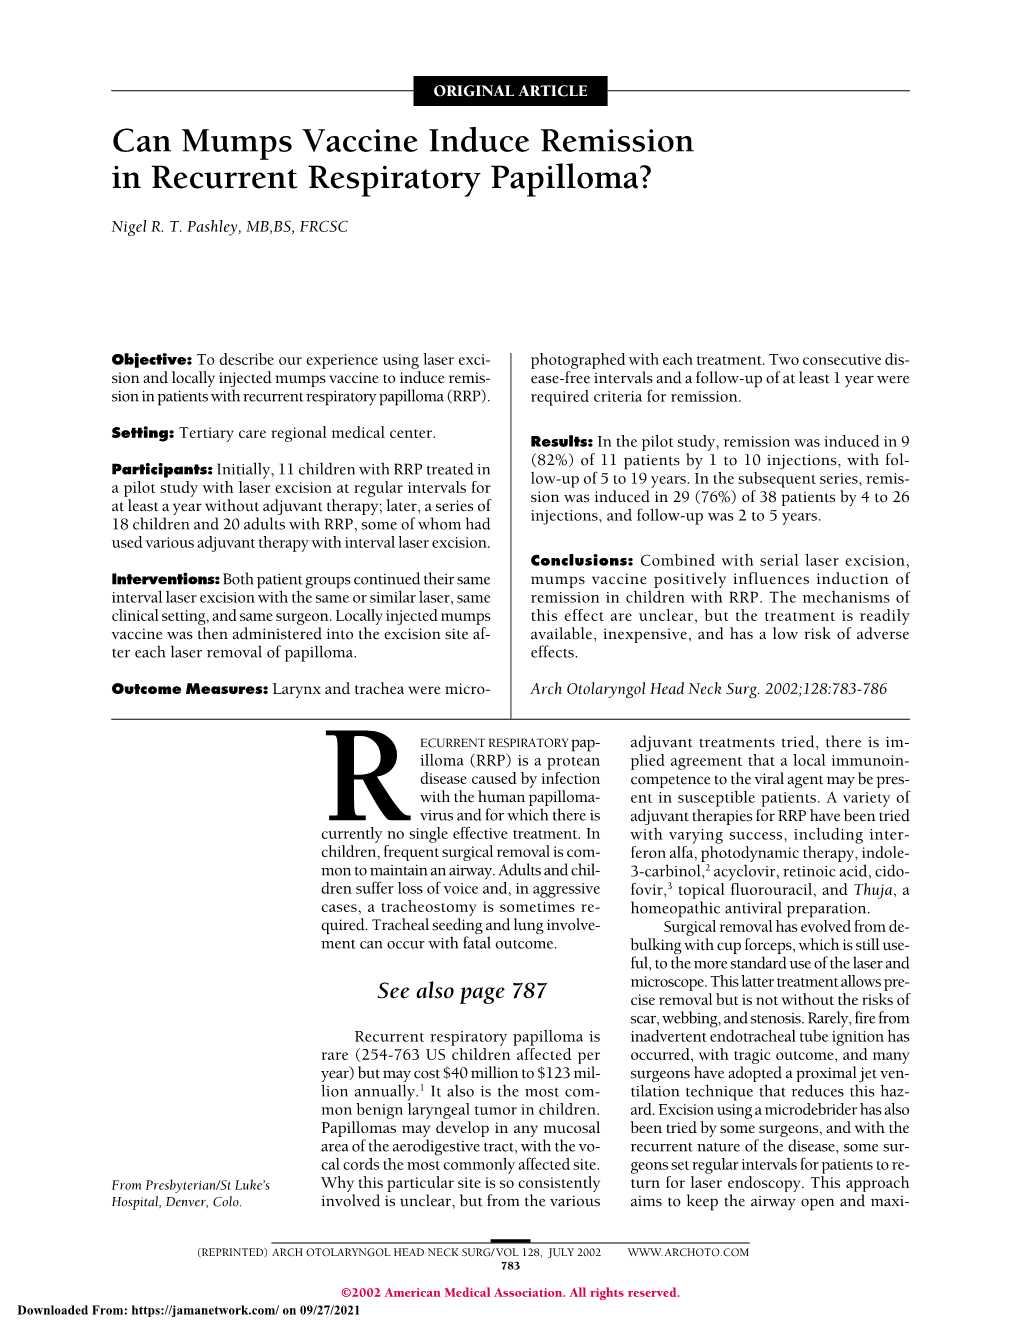 Can Mumps Vaccine Induce Remission in Recurrent Respiratory Papilloma?